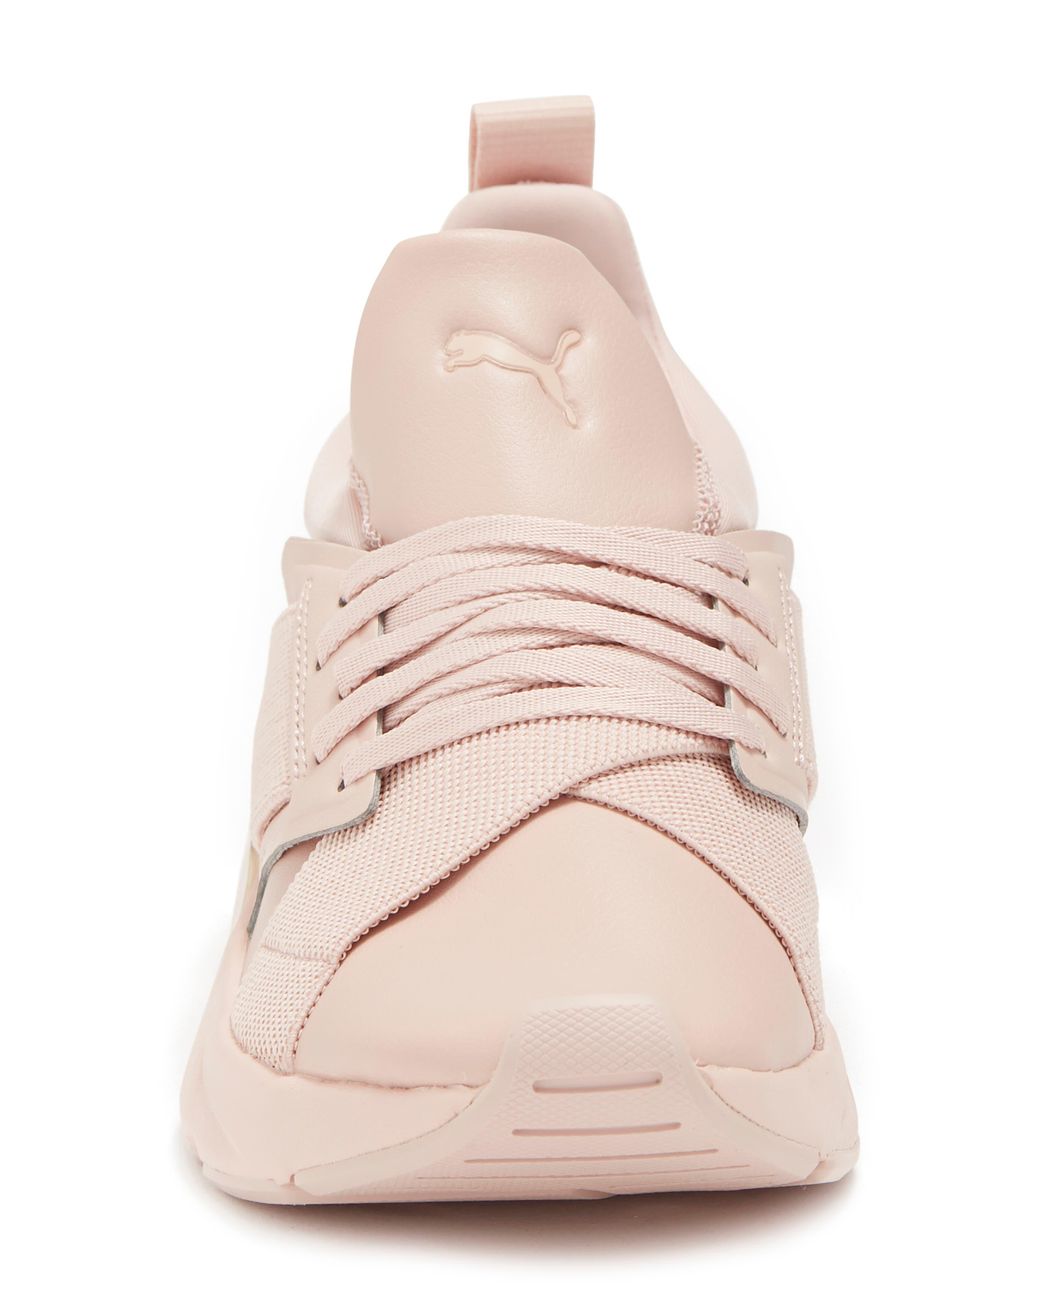 PUMA Muse X5 Muted Animal Print Sneaker In Rose Quartz At Nordstrom Rack in  Natural | Lyst